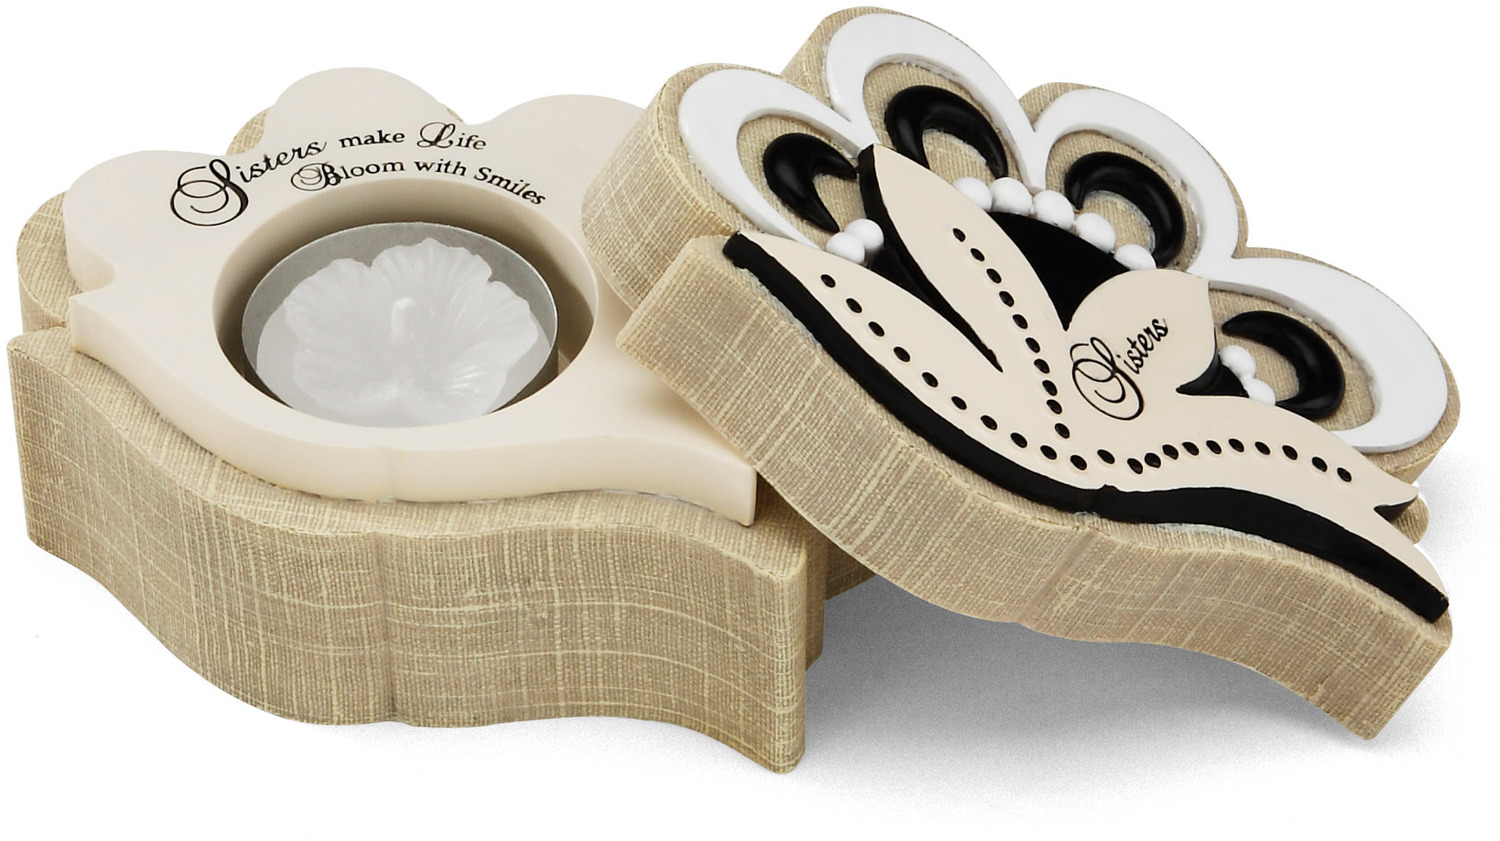 Sister by Modeles - Sister - 4.5" x 2" Candle Holder